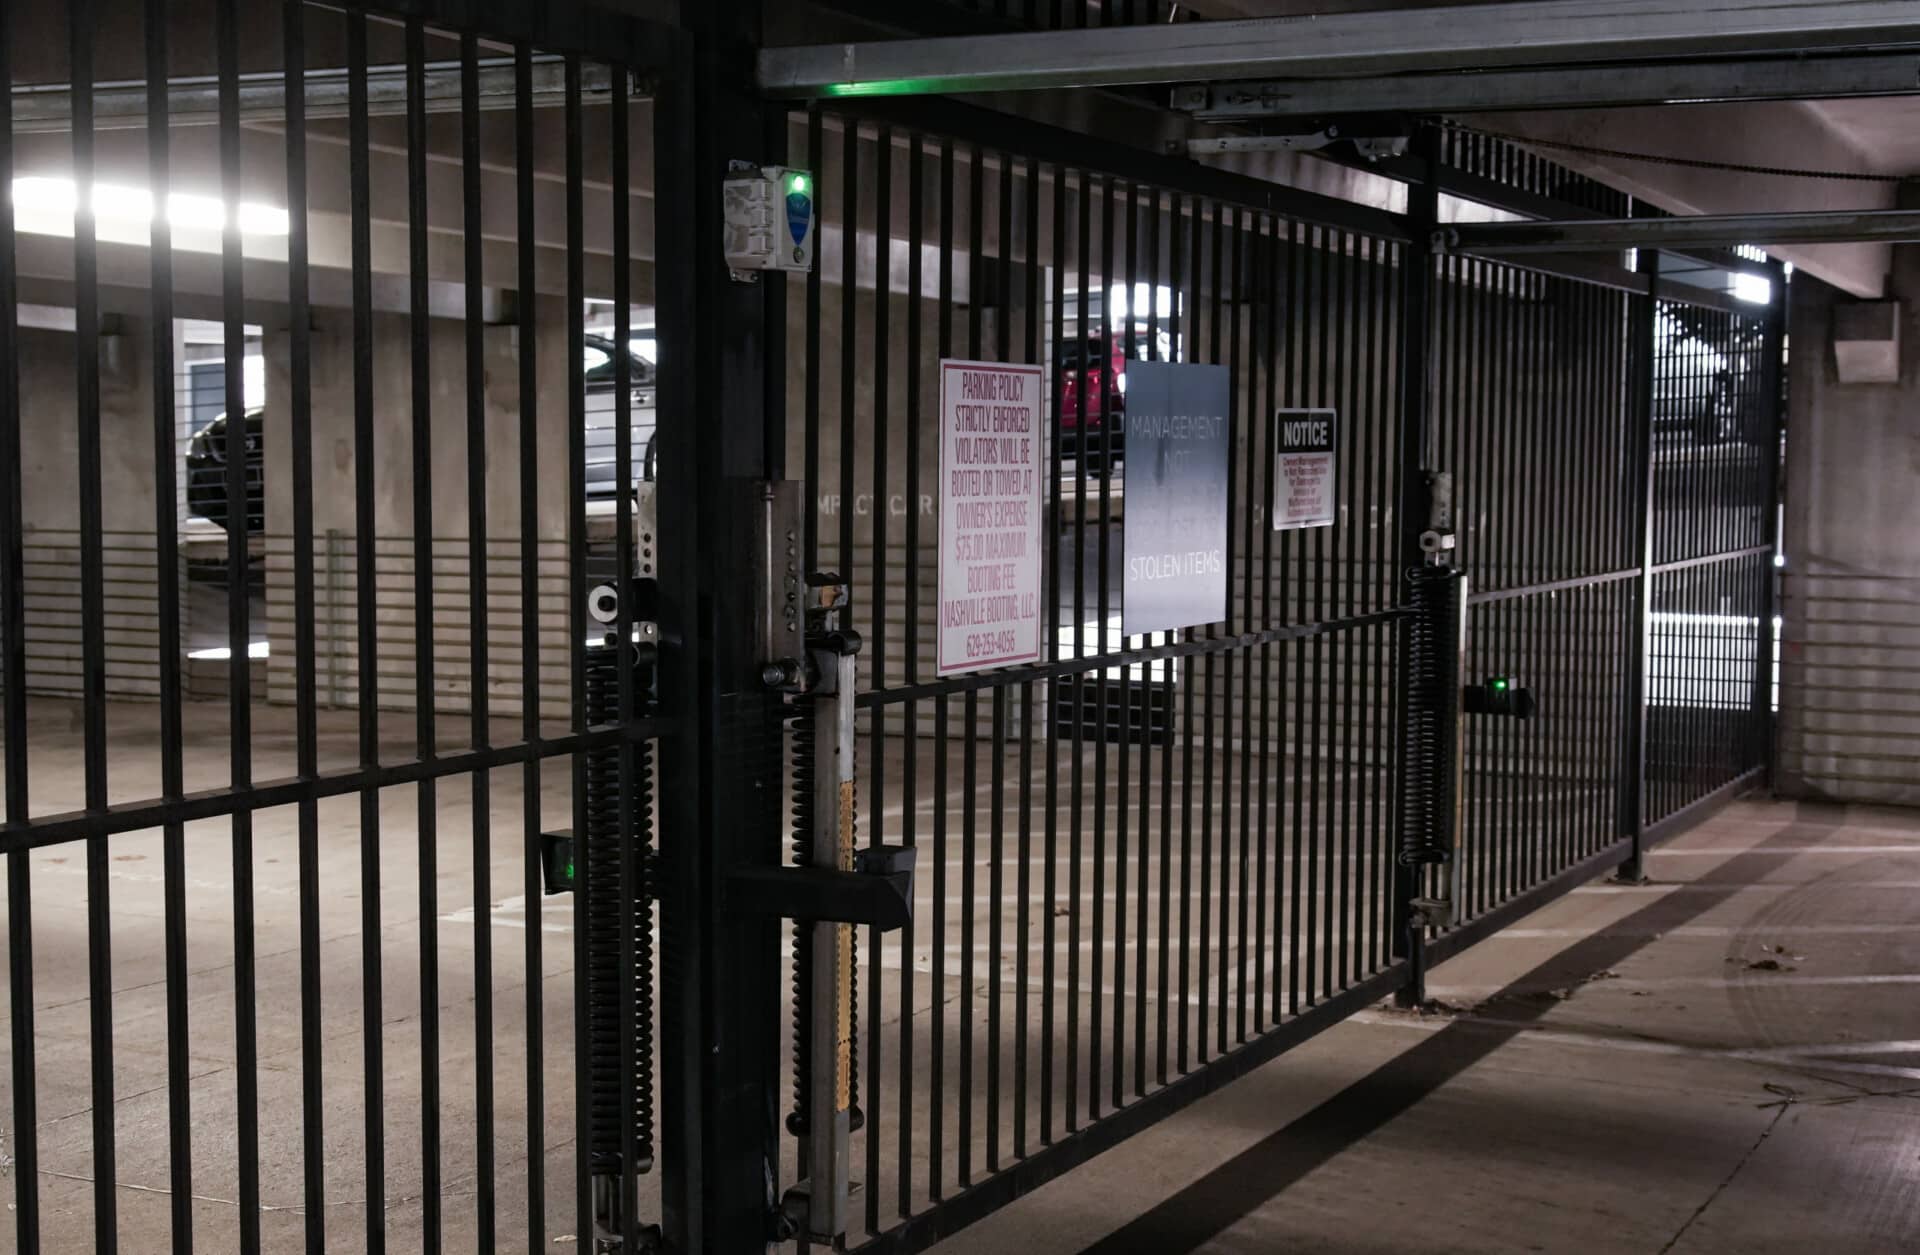 Security gate with green light showing it is in operation